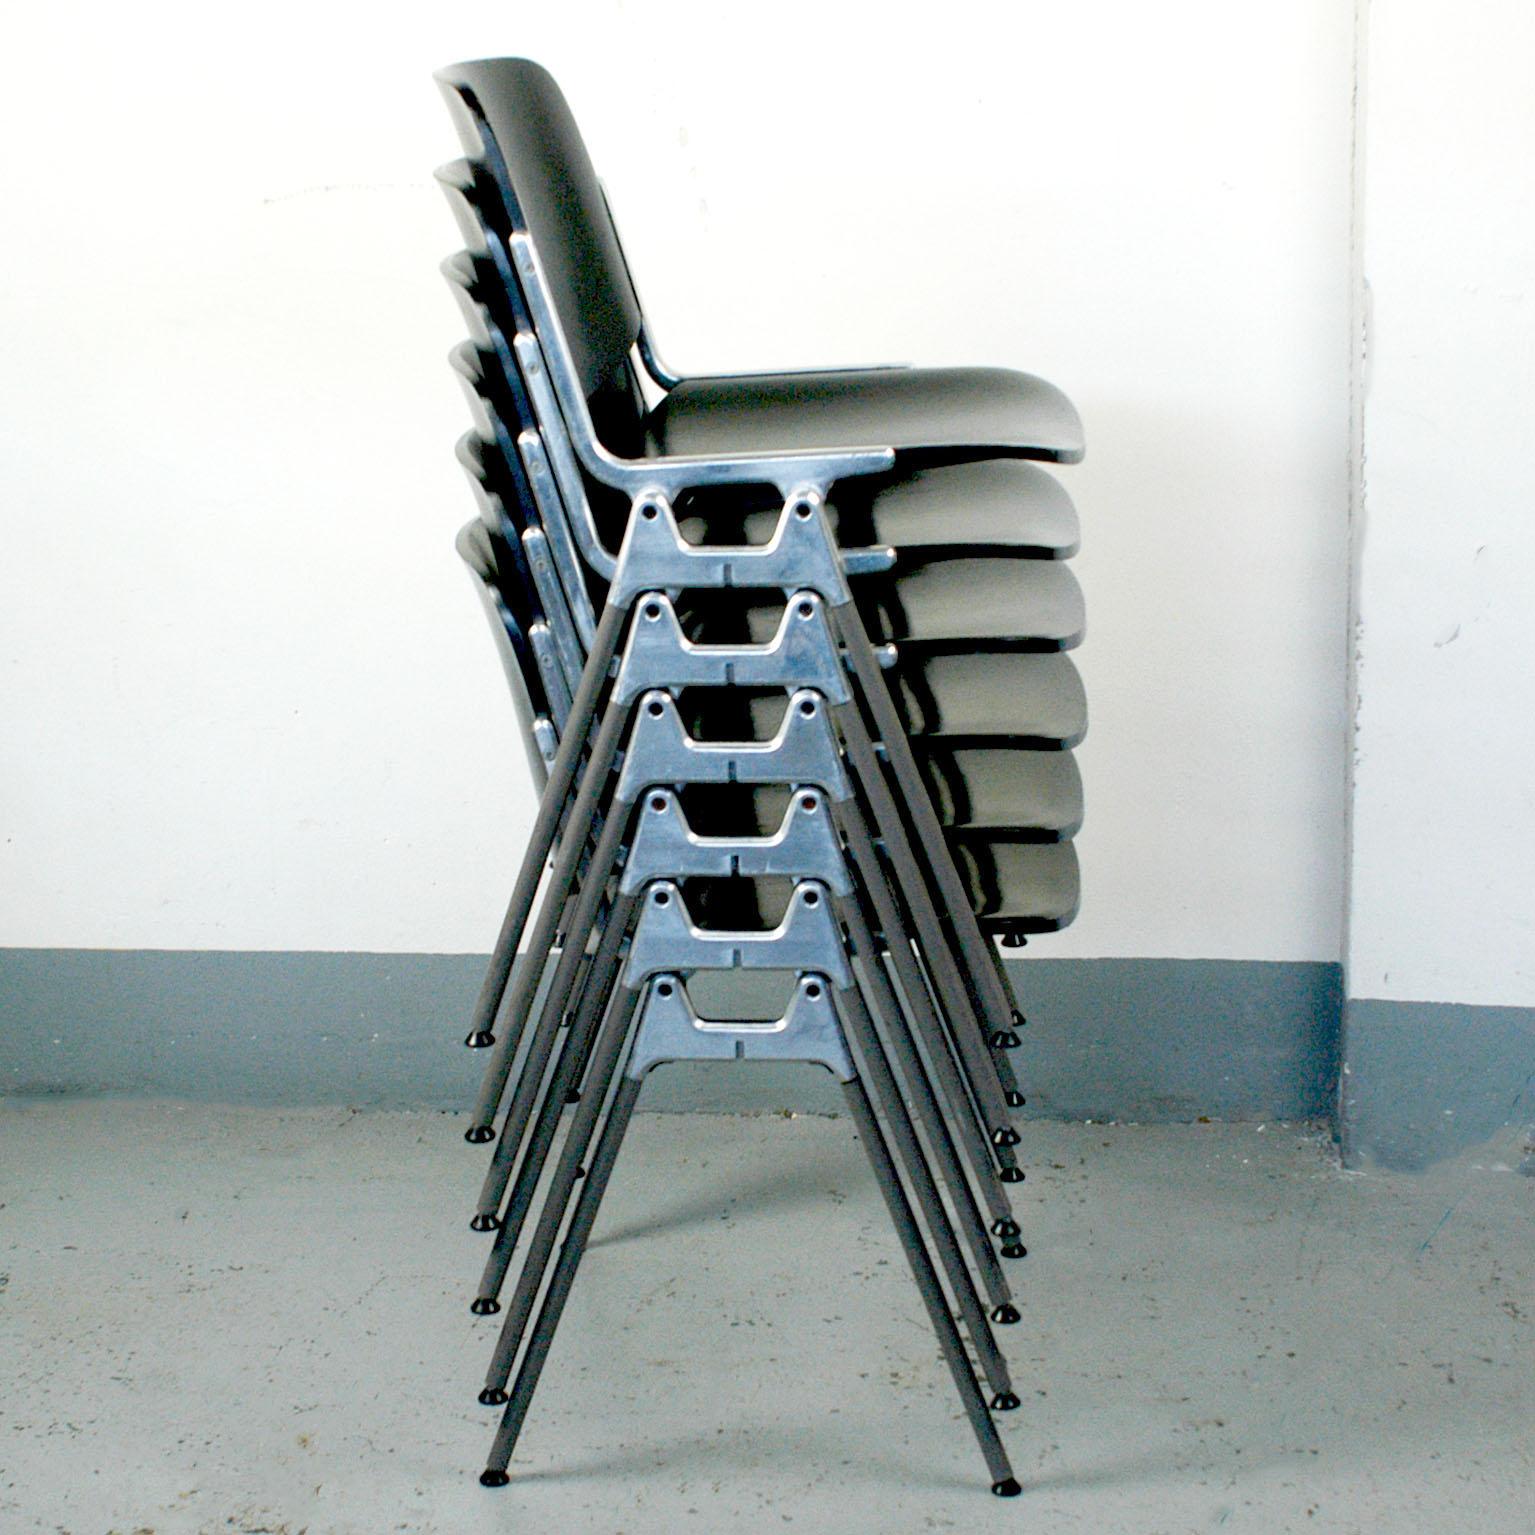 Set of four iconic Italian Modern DSC 106 stacking chairs, designed 1965 by Giancarlo Piretti for Castelli. This set features black lacquered seats and backs, they are in very nice condition with a few signs of wear due to their age. Perfect and